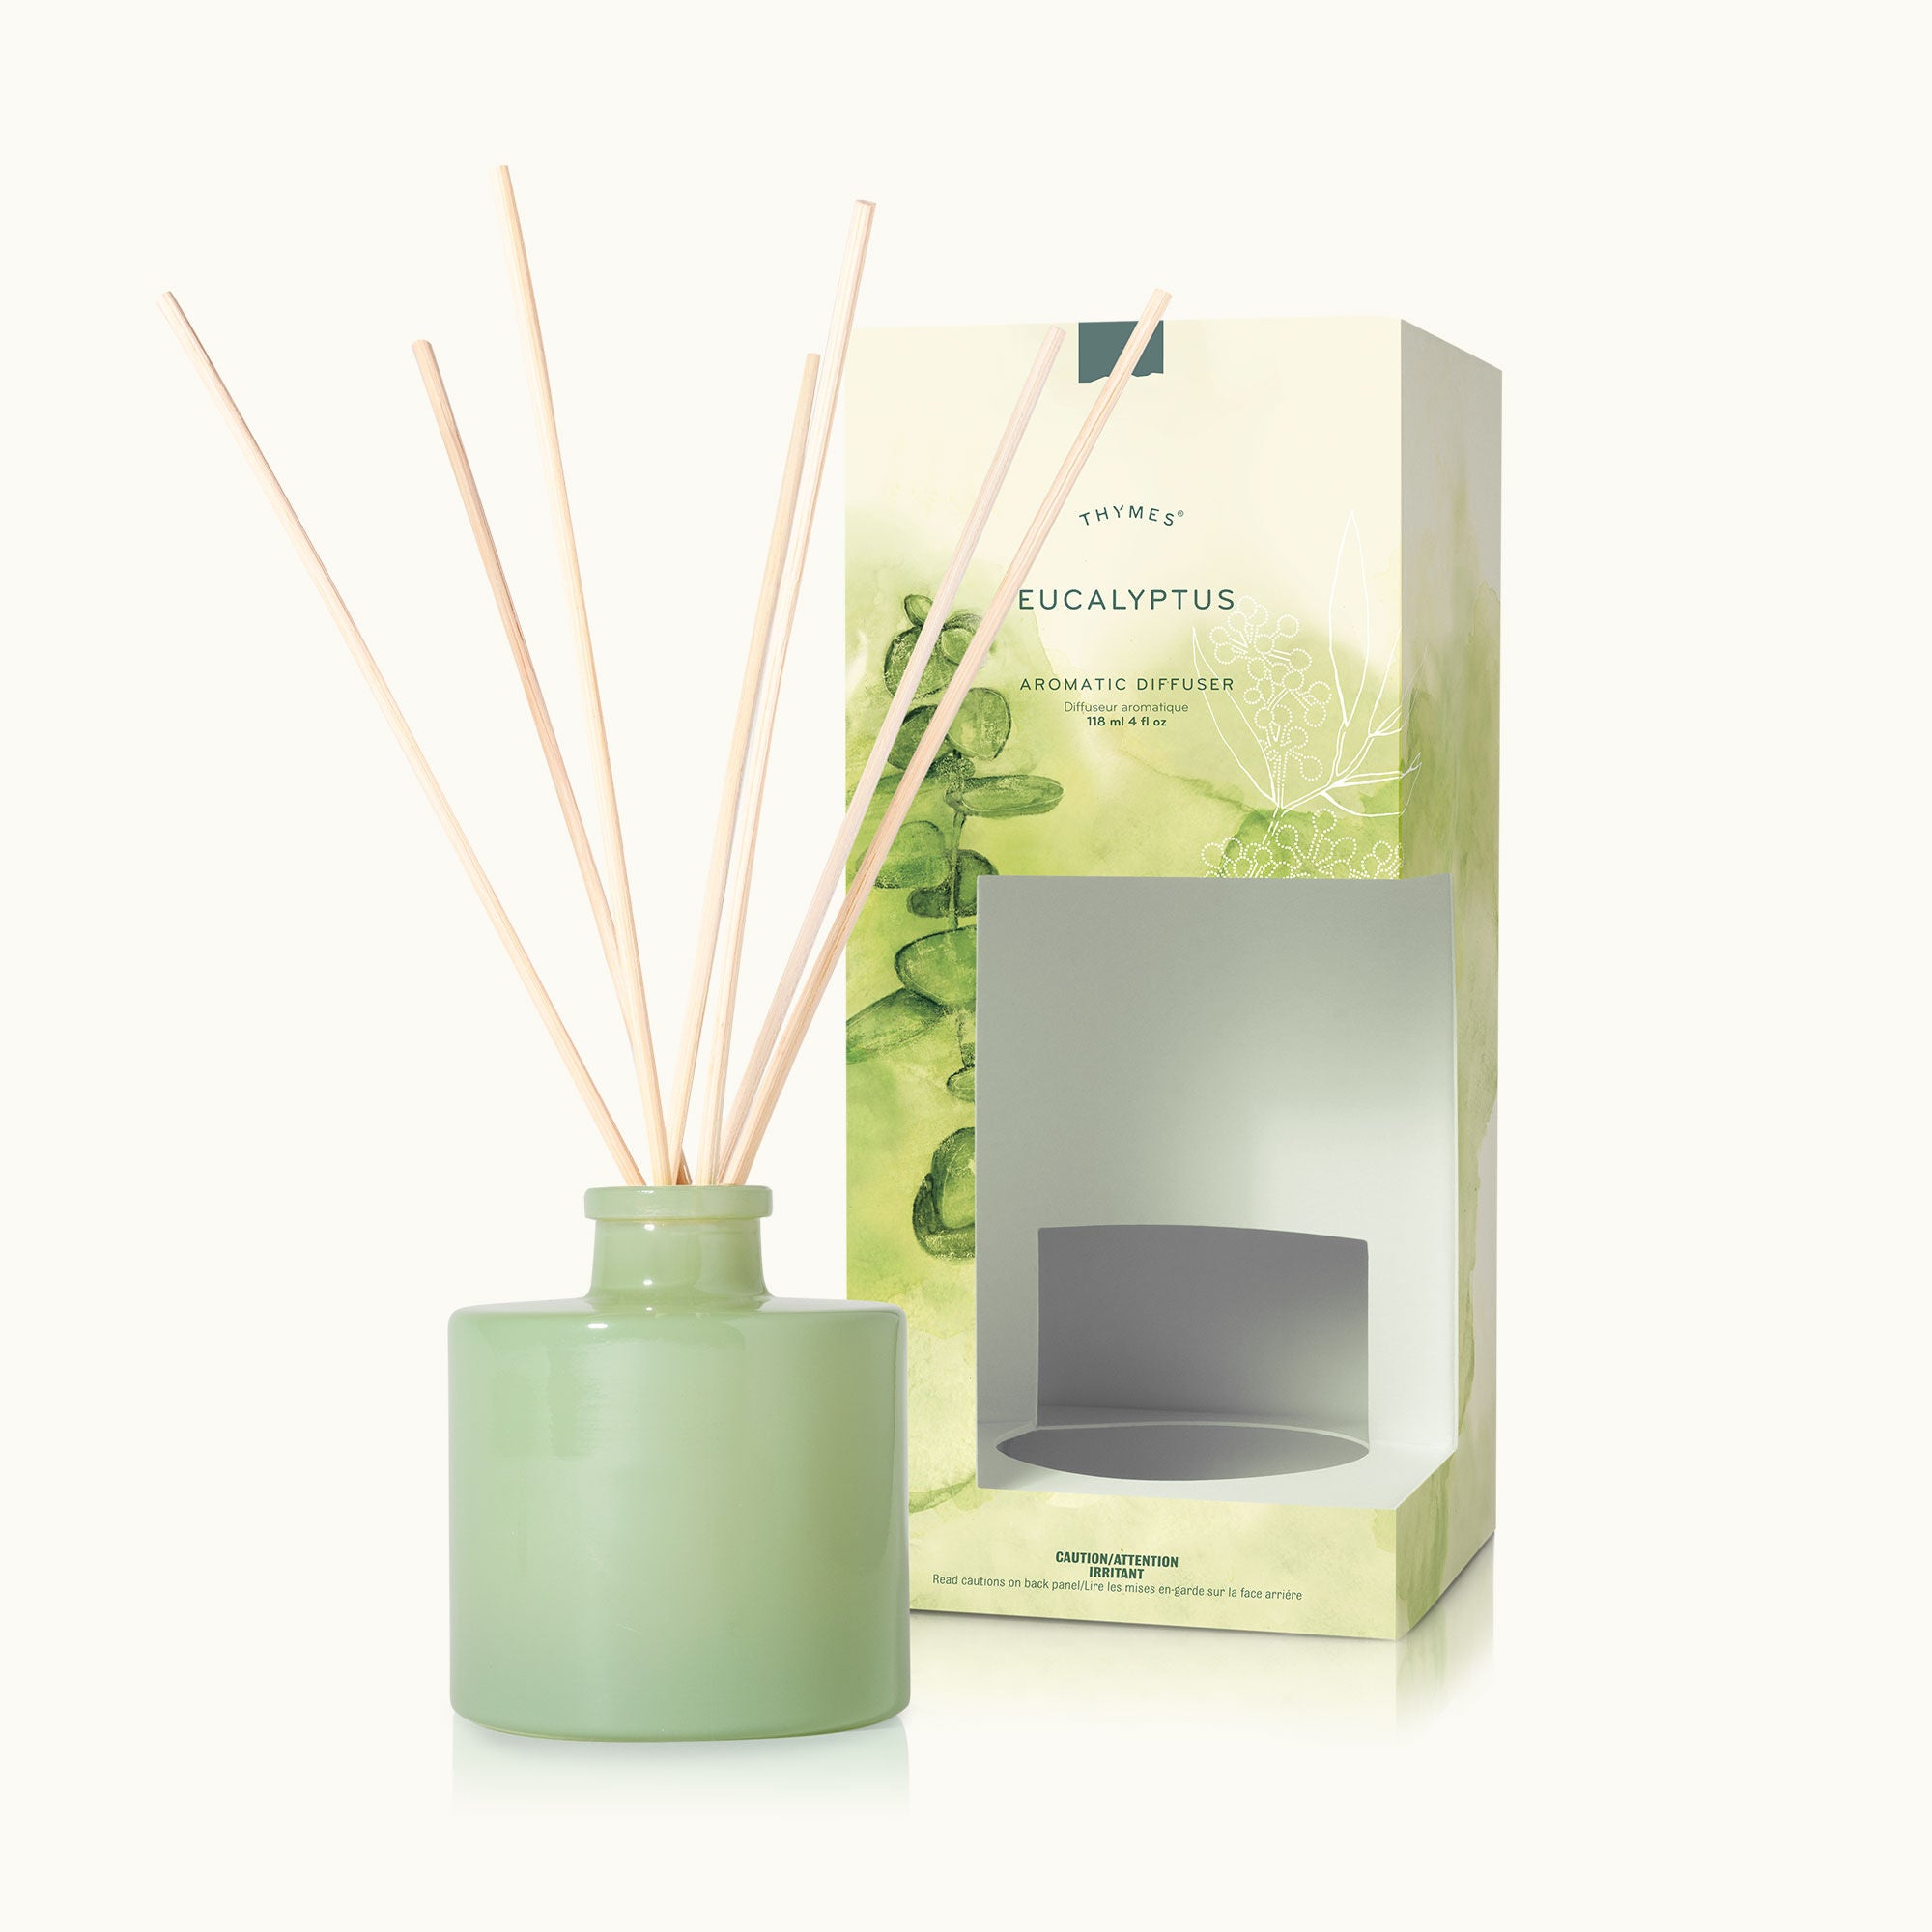 EUCALYPTUS TRAVEL-SIZE REED DIFFUSER